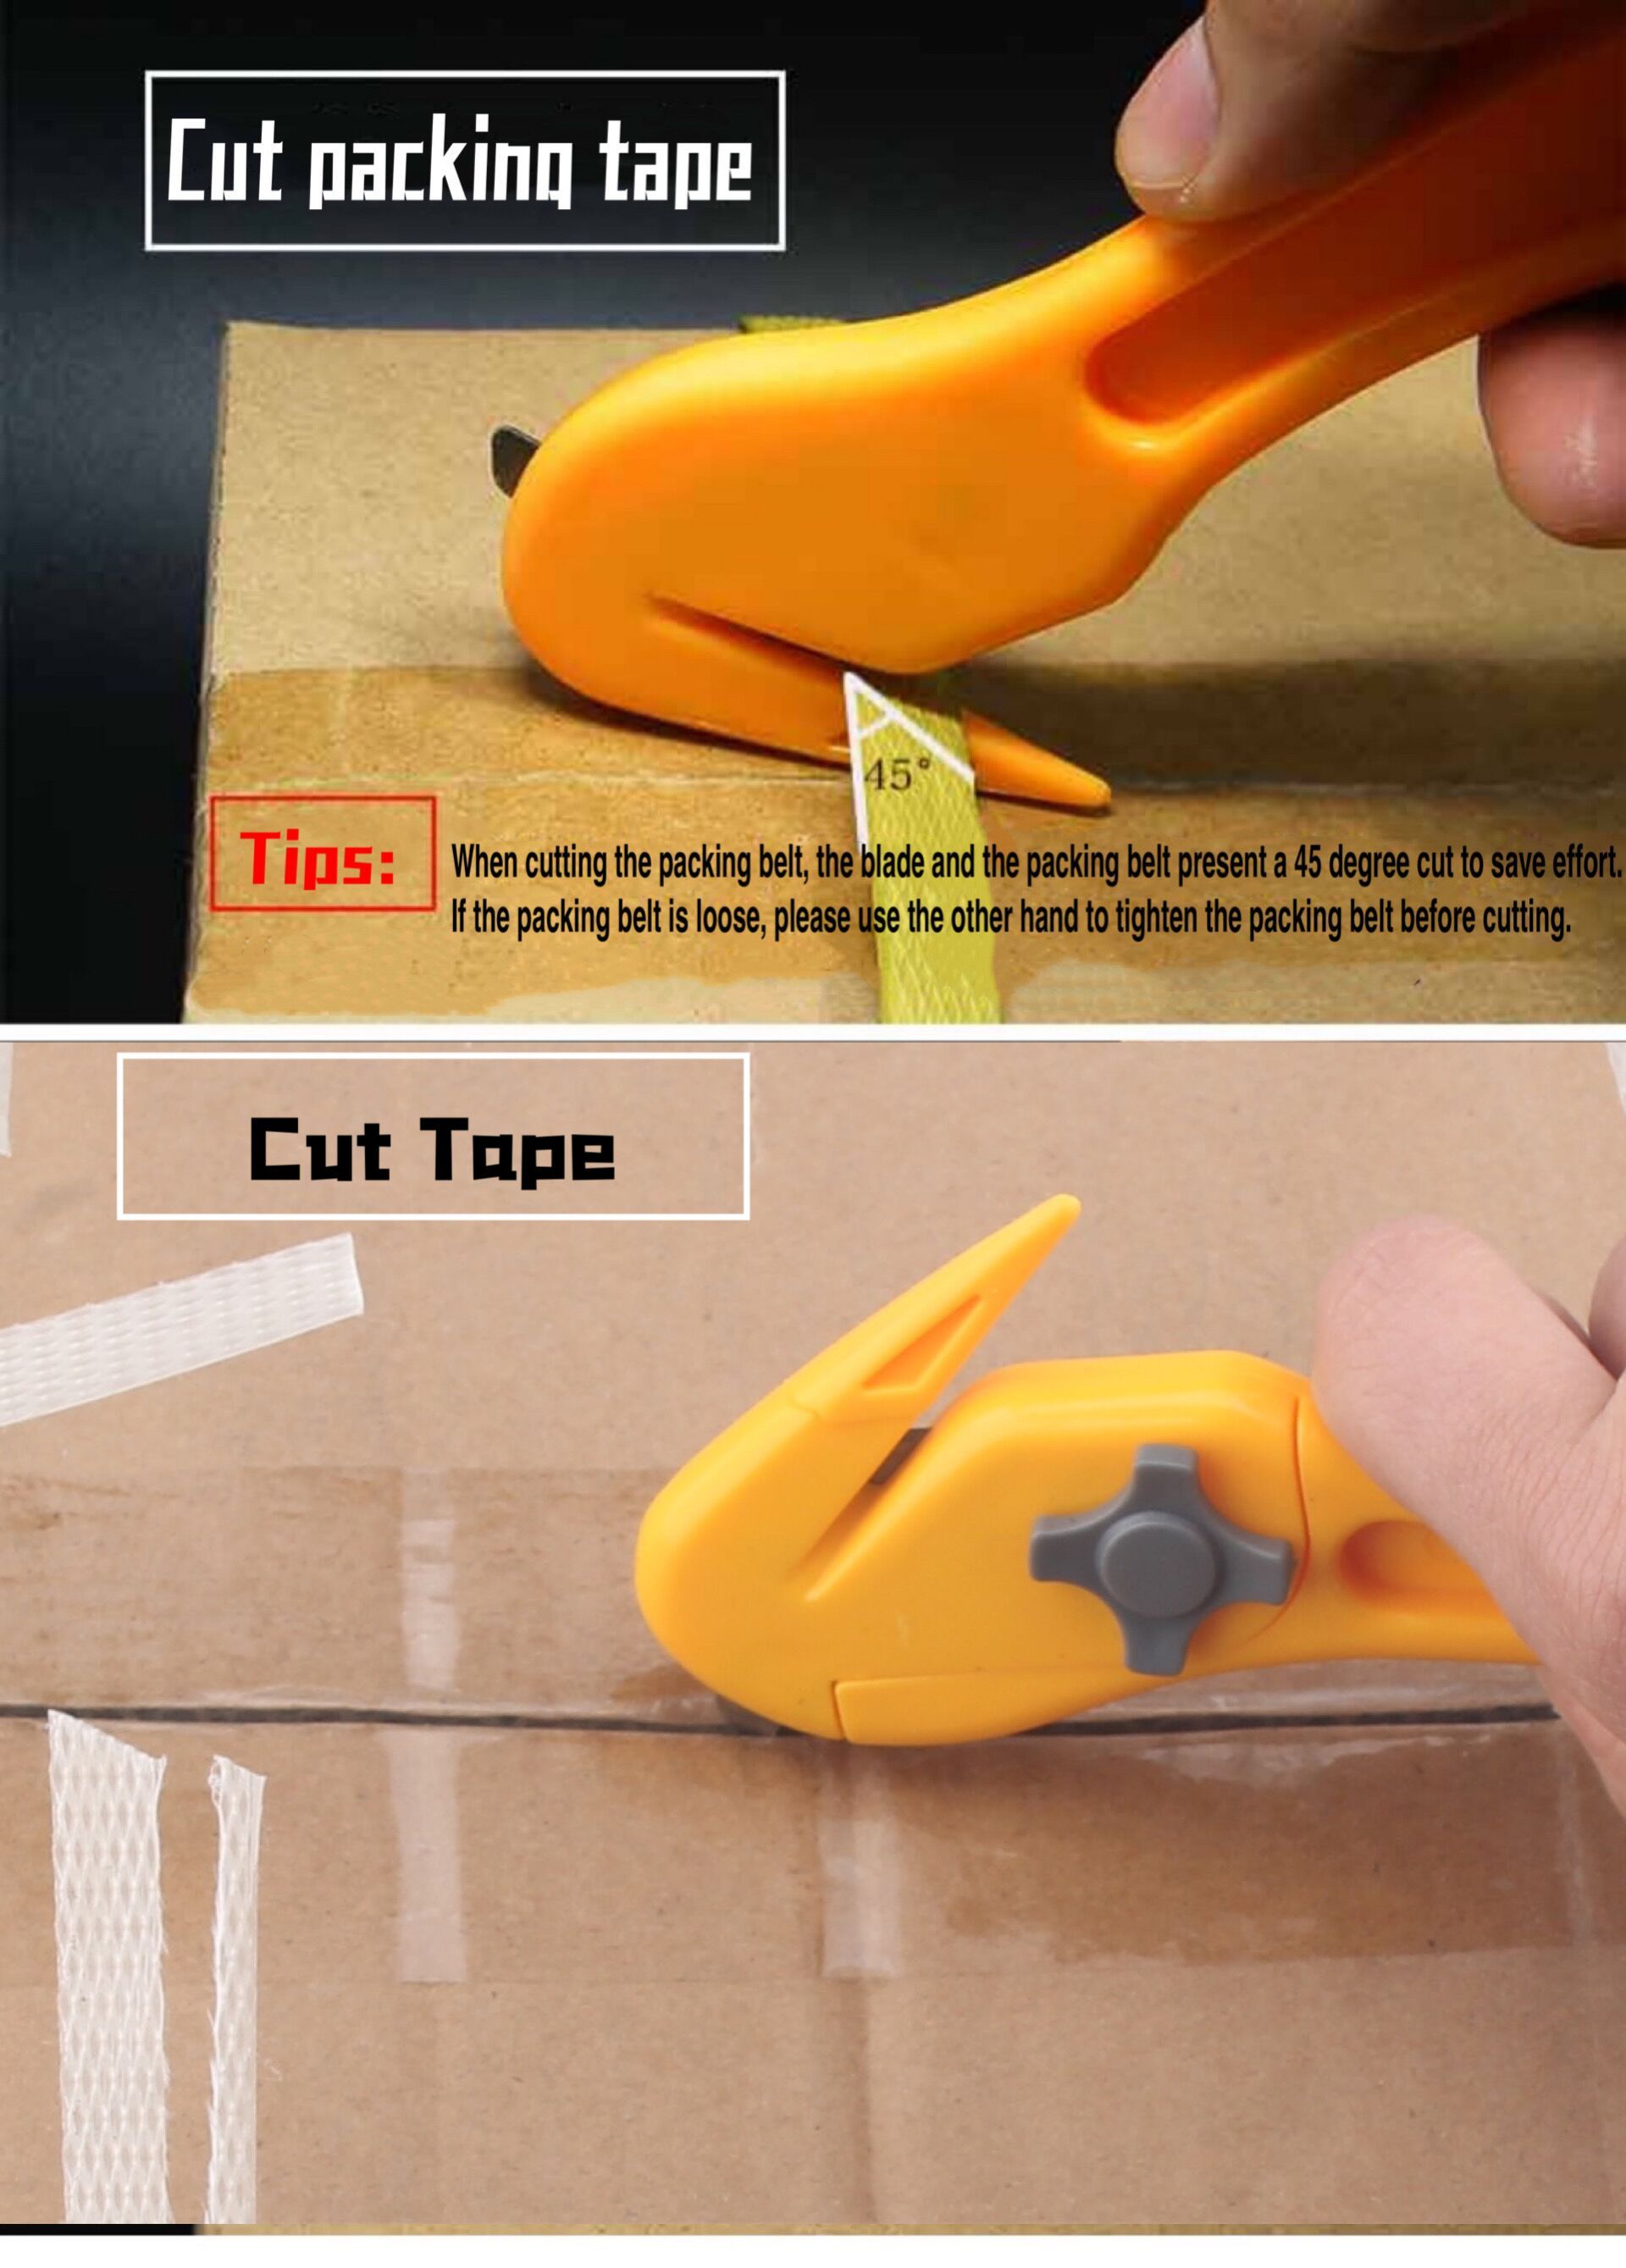 Safety Unboxing Knife The Ultimate Tool For Unpacking And Cutting